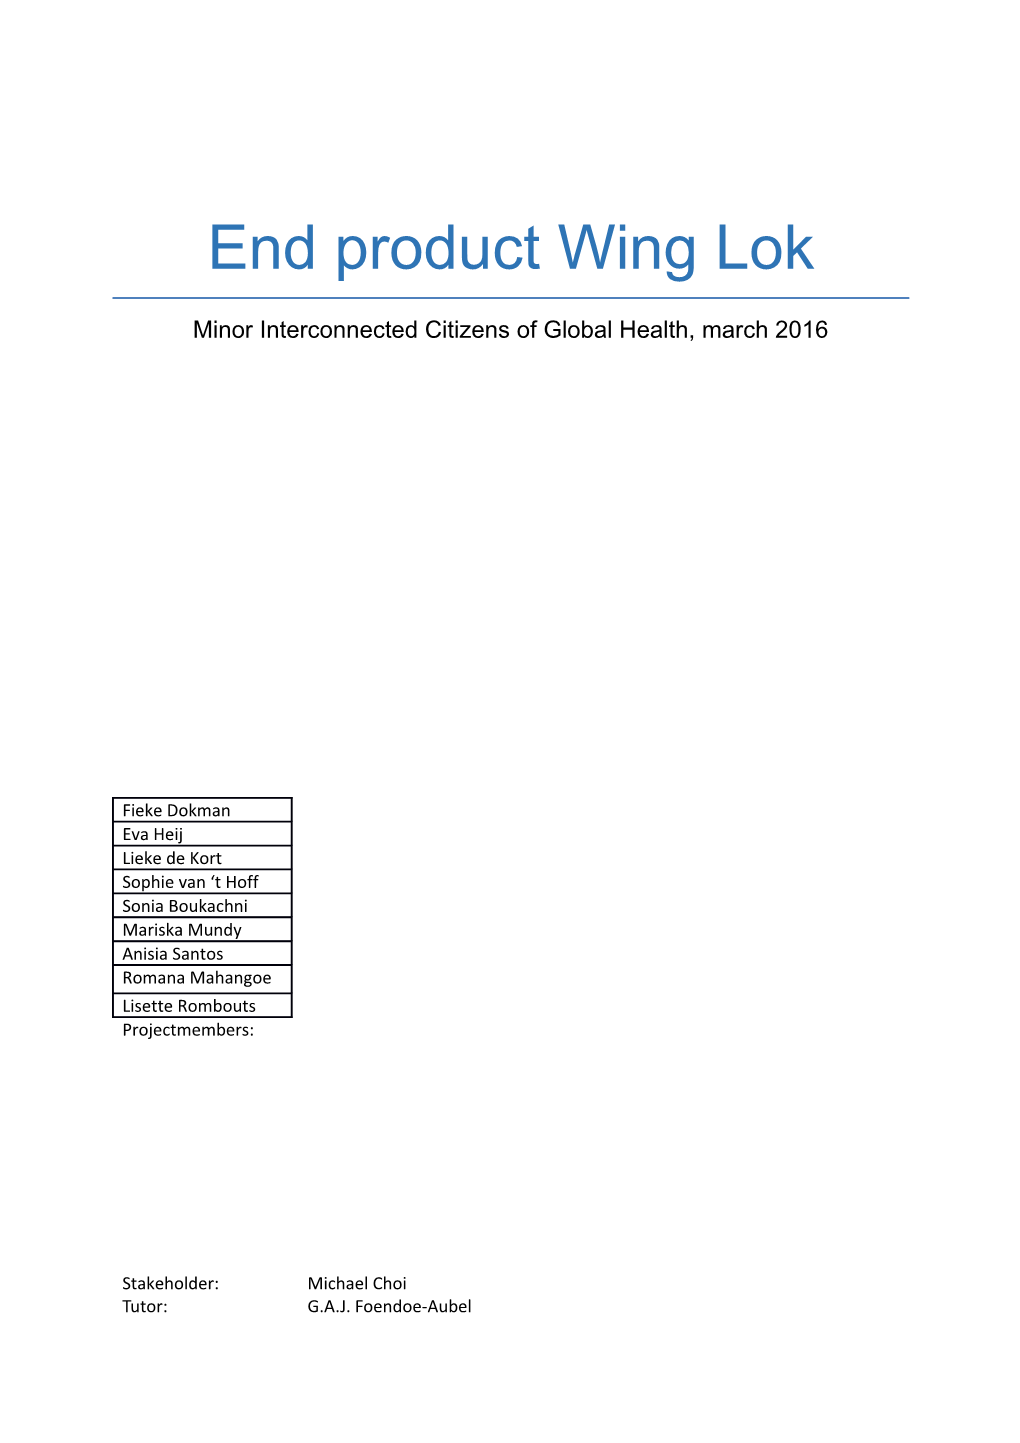 End Product Wing Lok